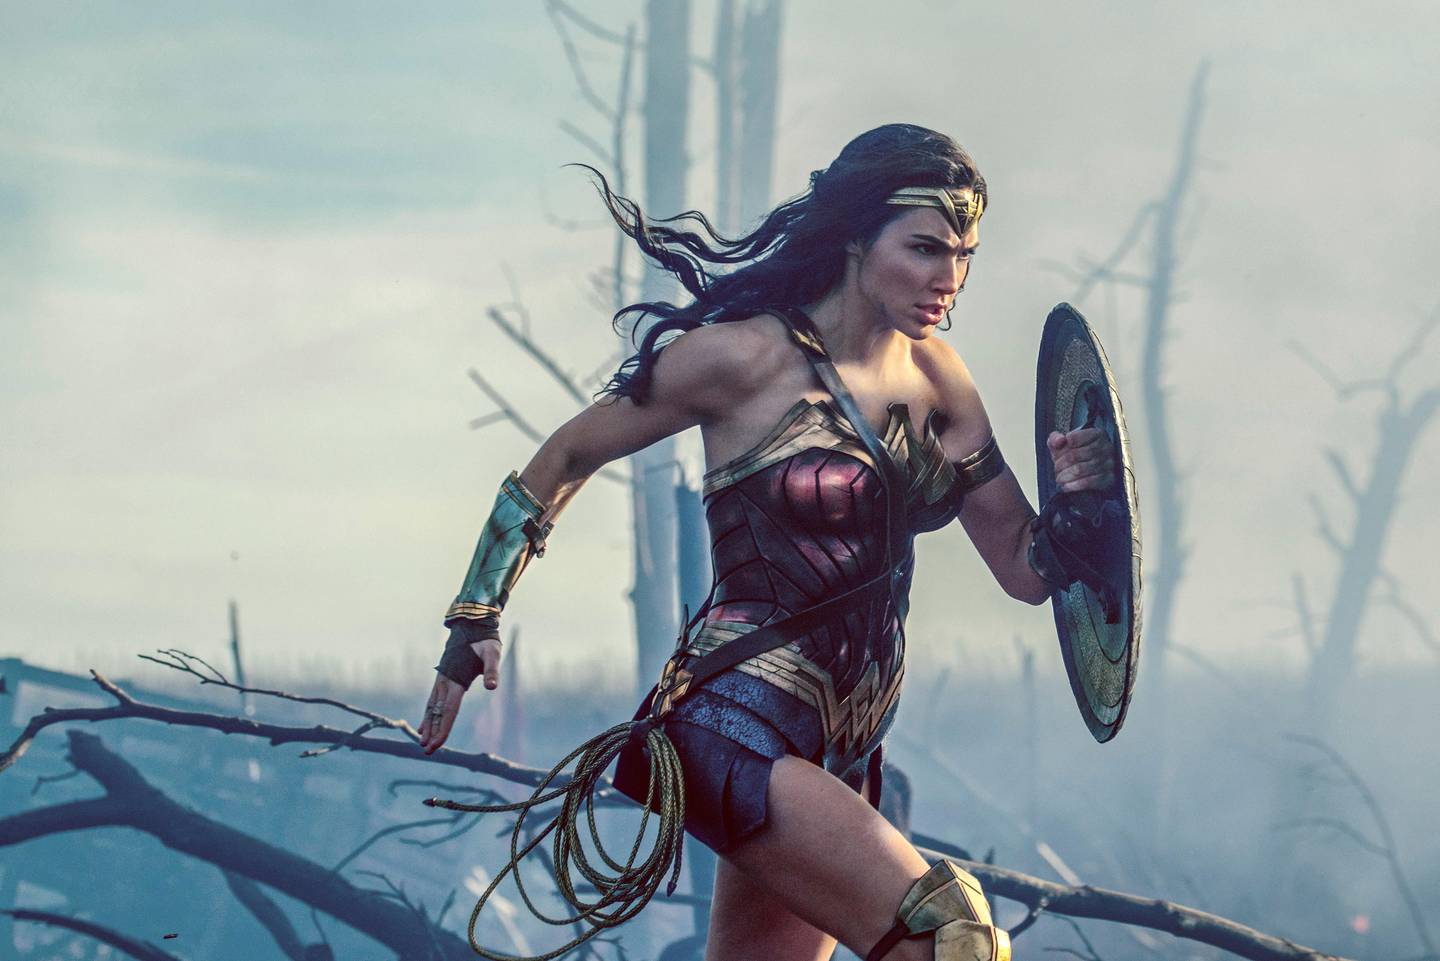 This image released by Warner Bros. Entertainment shows Gal Gadot in a scene from "Wonder Woman." A new study organized by TimeÄôs Up, the Hollywood-based organization formed to promote gender equality, finds that female-led films outperform male-led movies at the box office. The study analyzed the 350 top-grossing films worldwide released between January 2014 and December 2017. It found that in films with small, medium and large budgets, all averaged better global grosses when a woman was listed as the lead star. (Clay Enos/Warner Bros. Entertainment via AP)